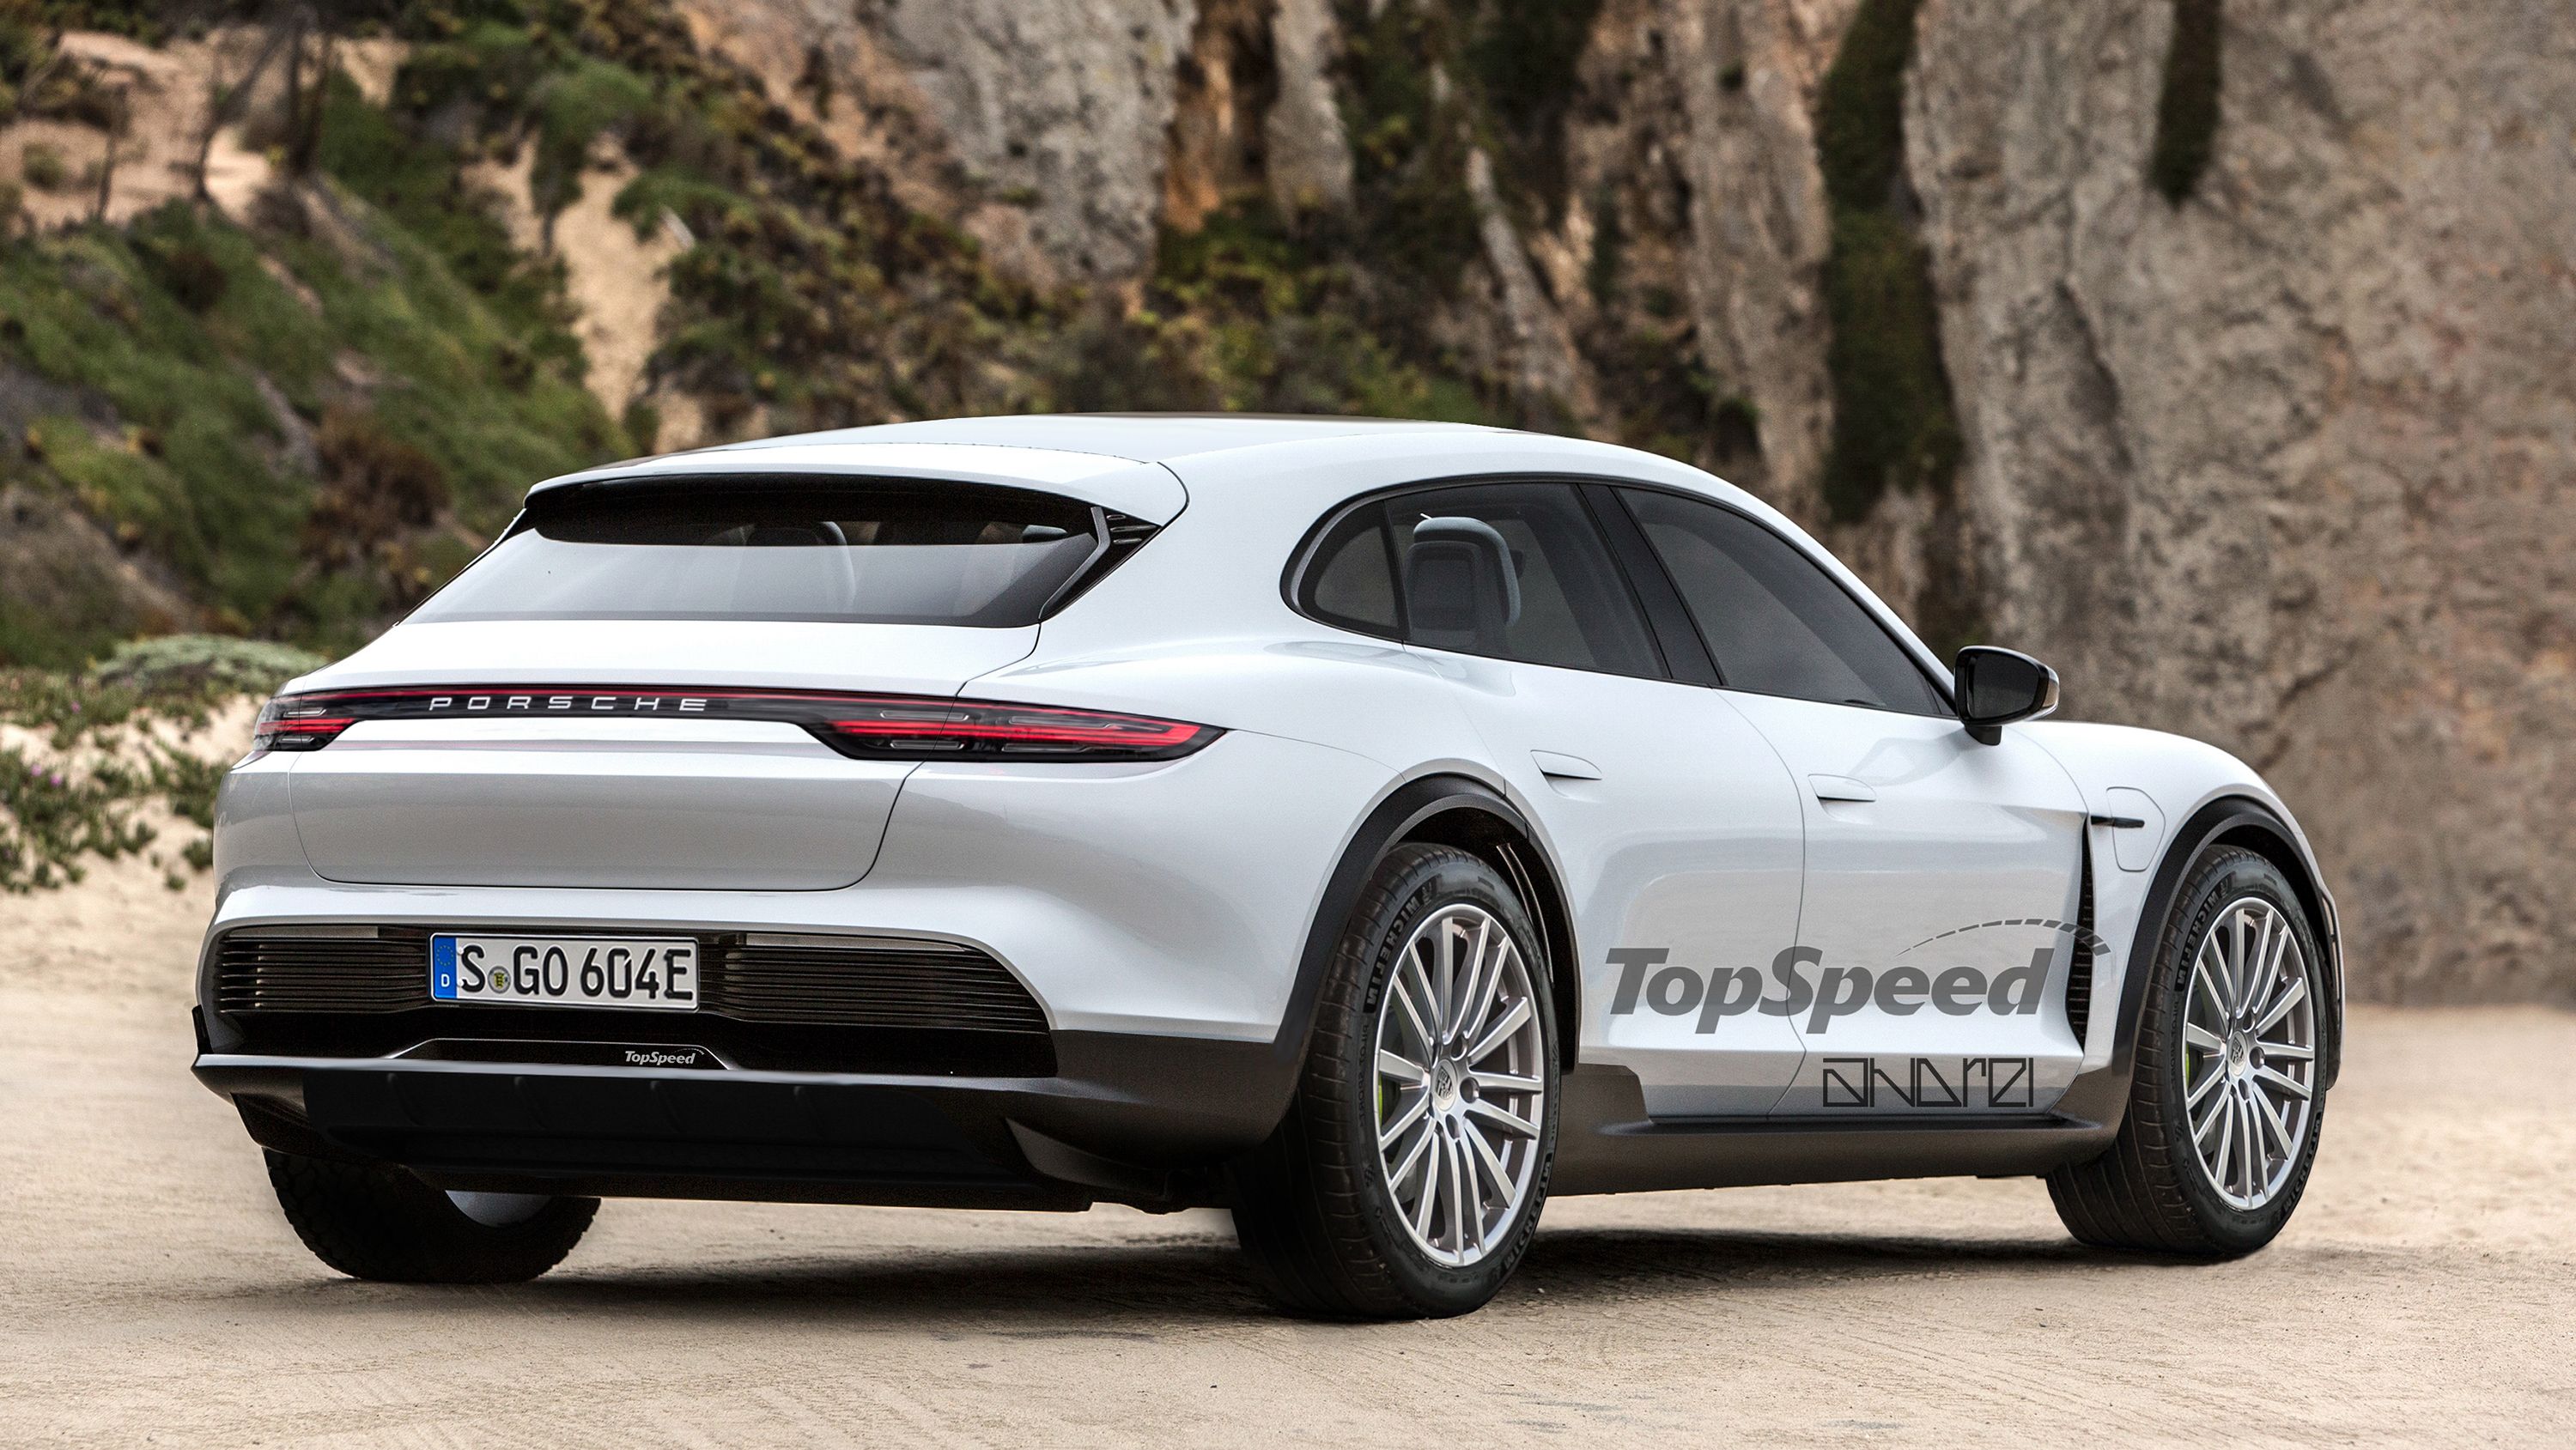 2020 Porsche’s Second Electric Car Delayed By At Least a Year